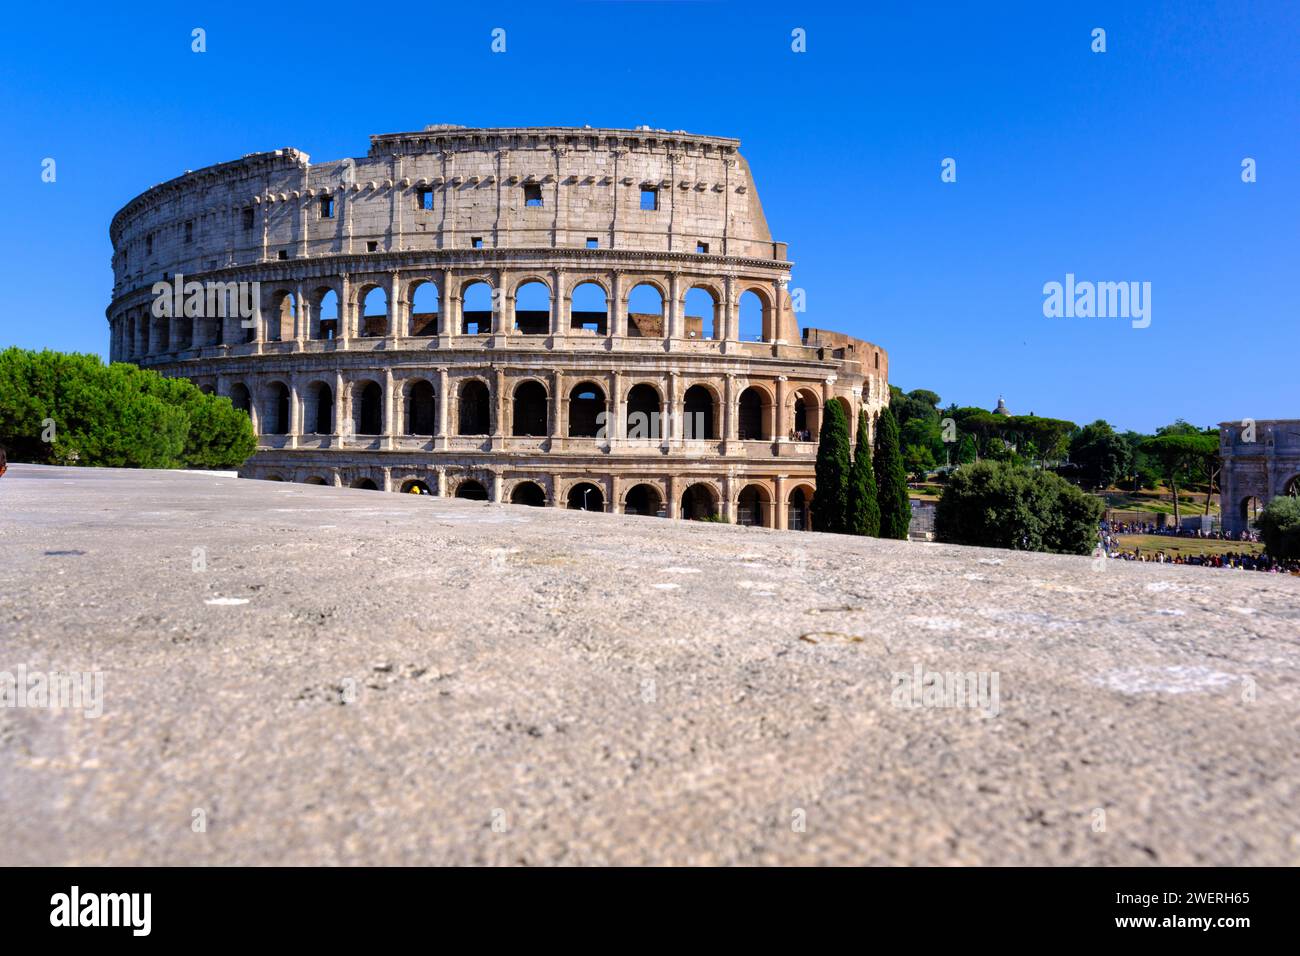 Rome Colosseum in the summertime, Italy Stock Photo